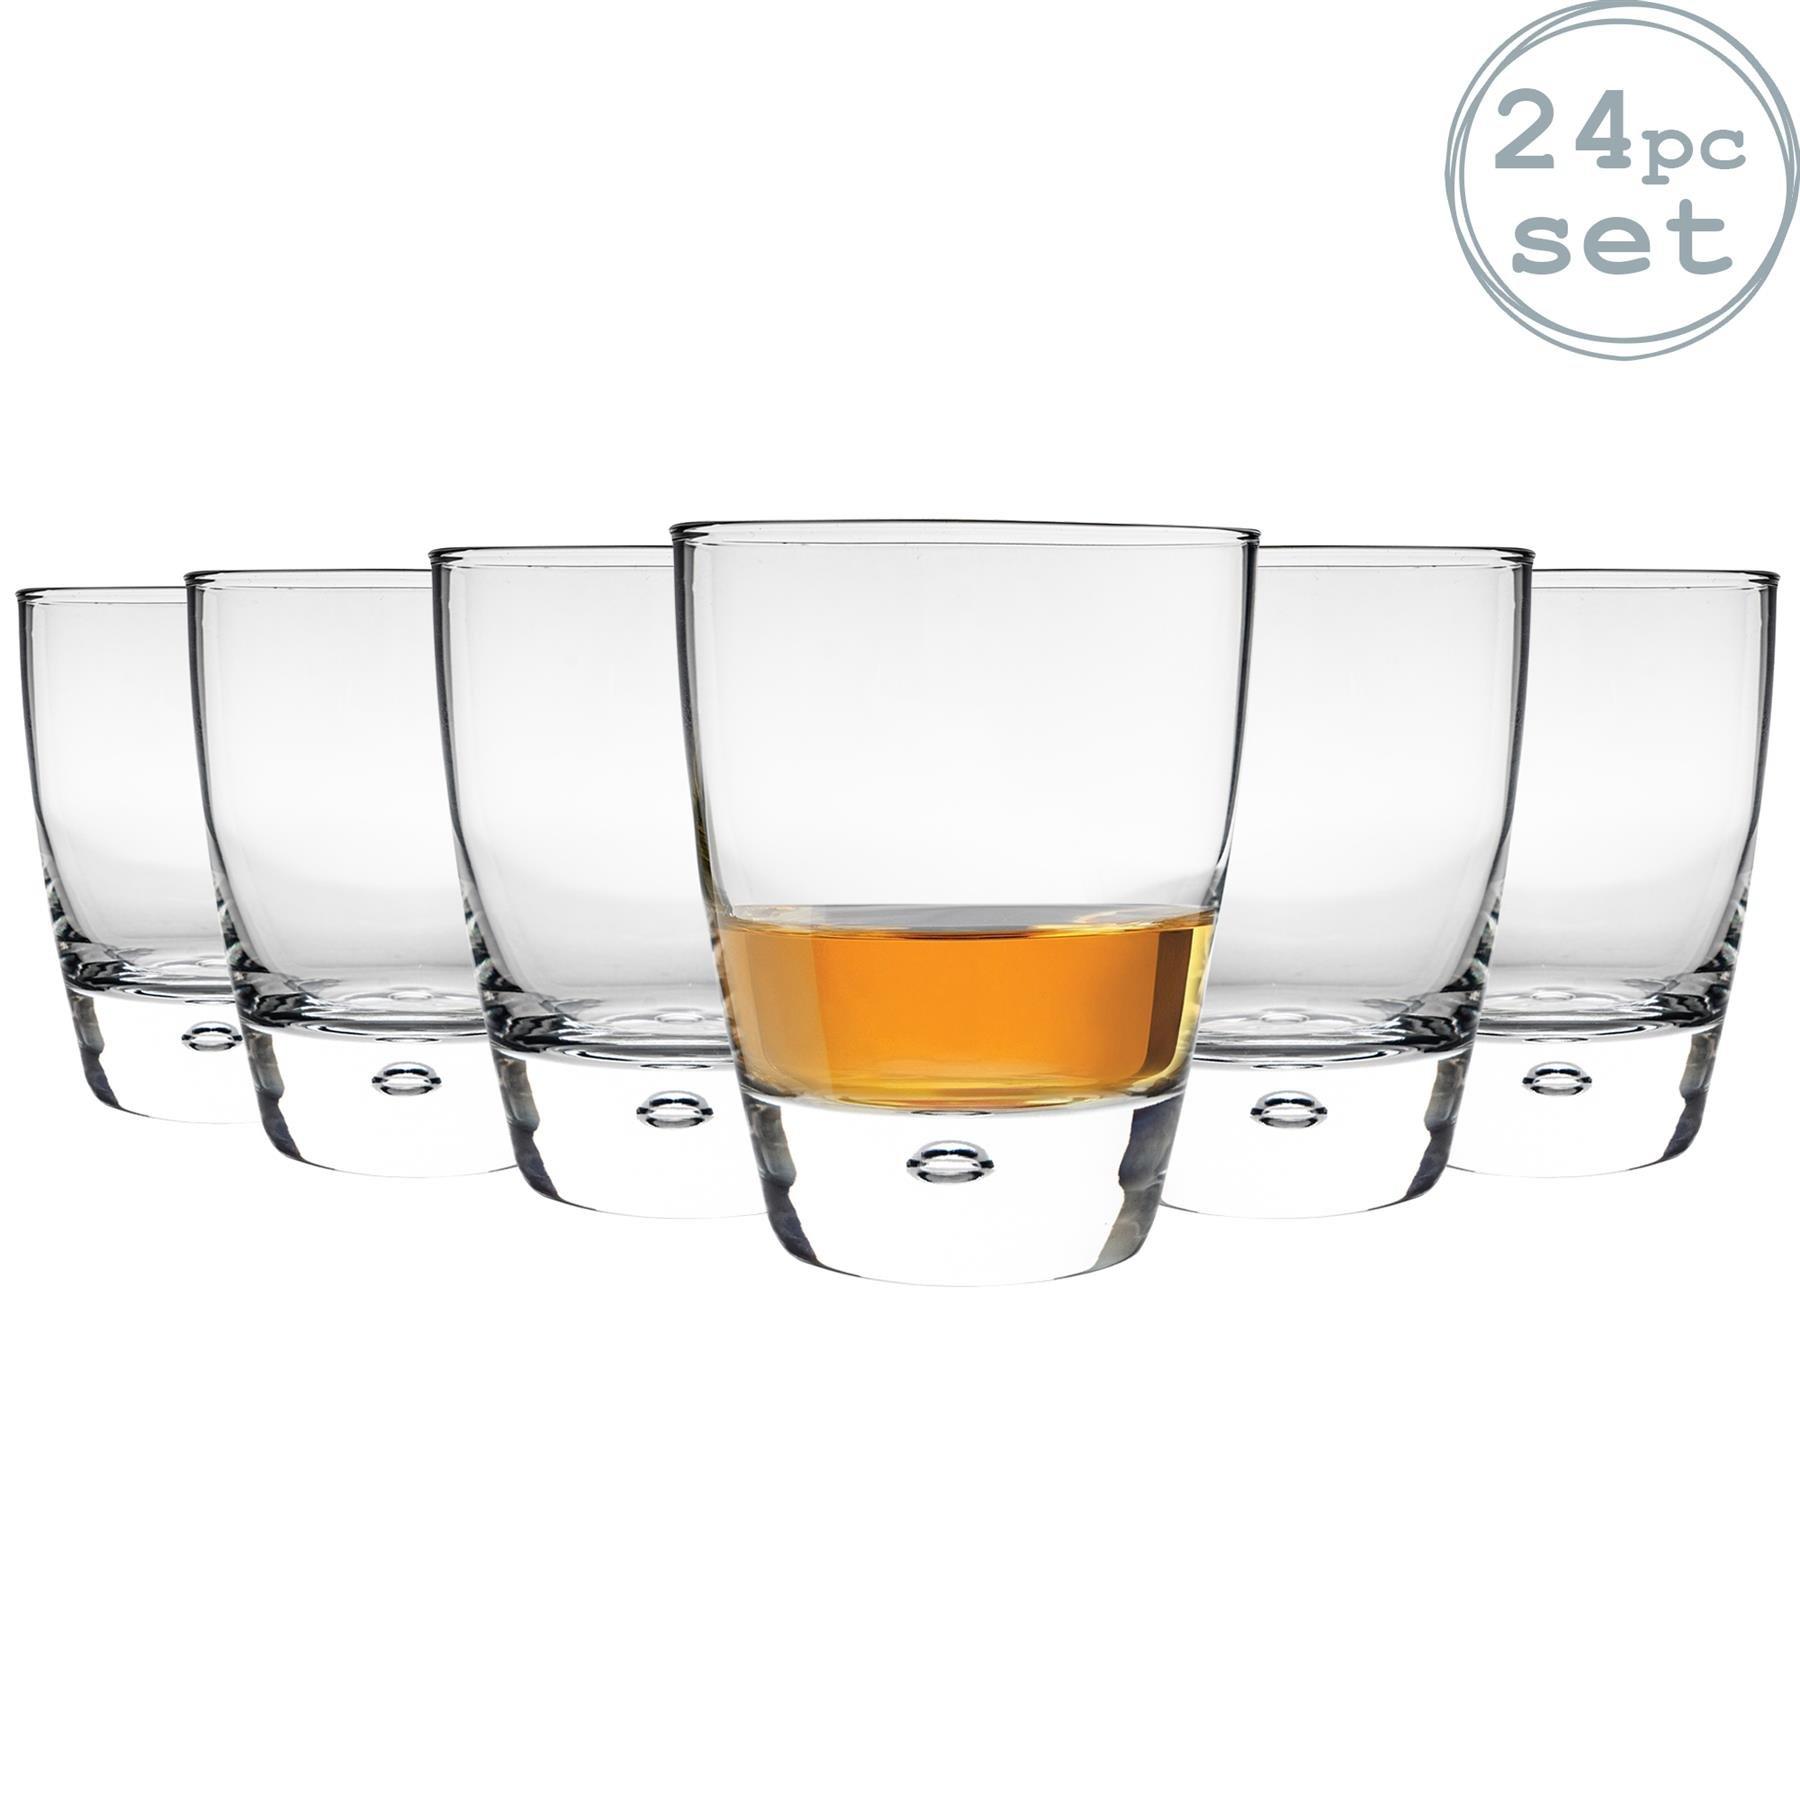 Luna Double Whisky Glasses - 340ml - Pack of 24